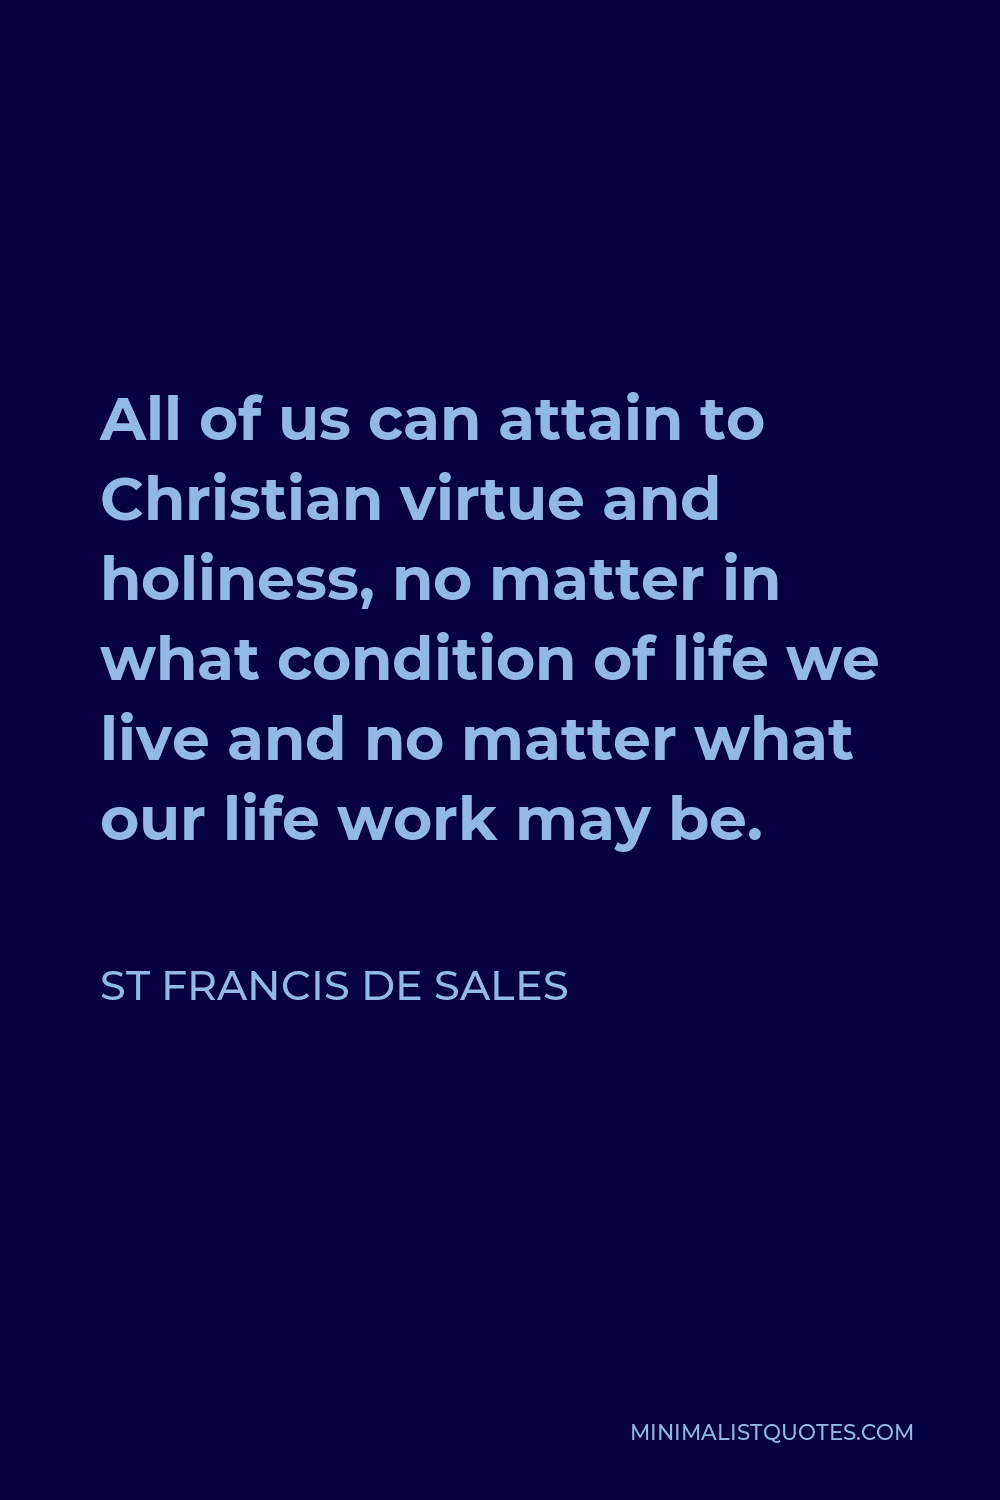 St Francis De Sales Quote - All of us can attain to Christian virtue and holiness, no matter in what condition of life we live and no matter what our life work may be.